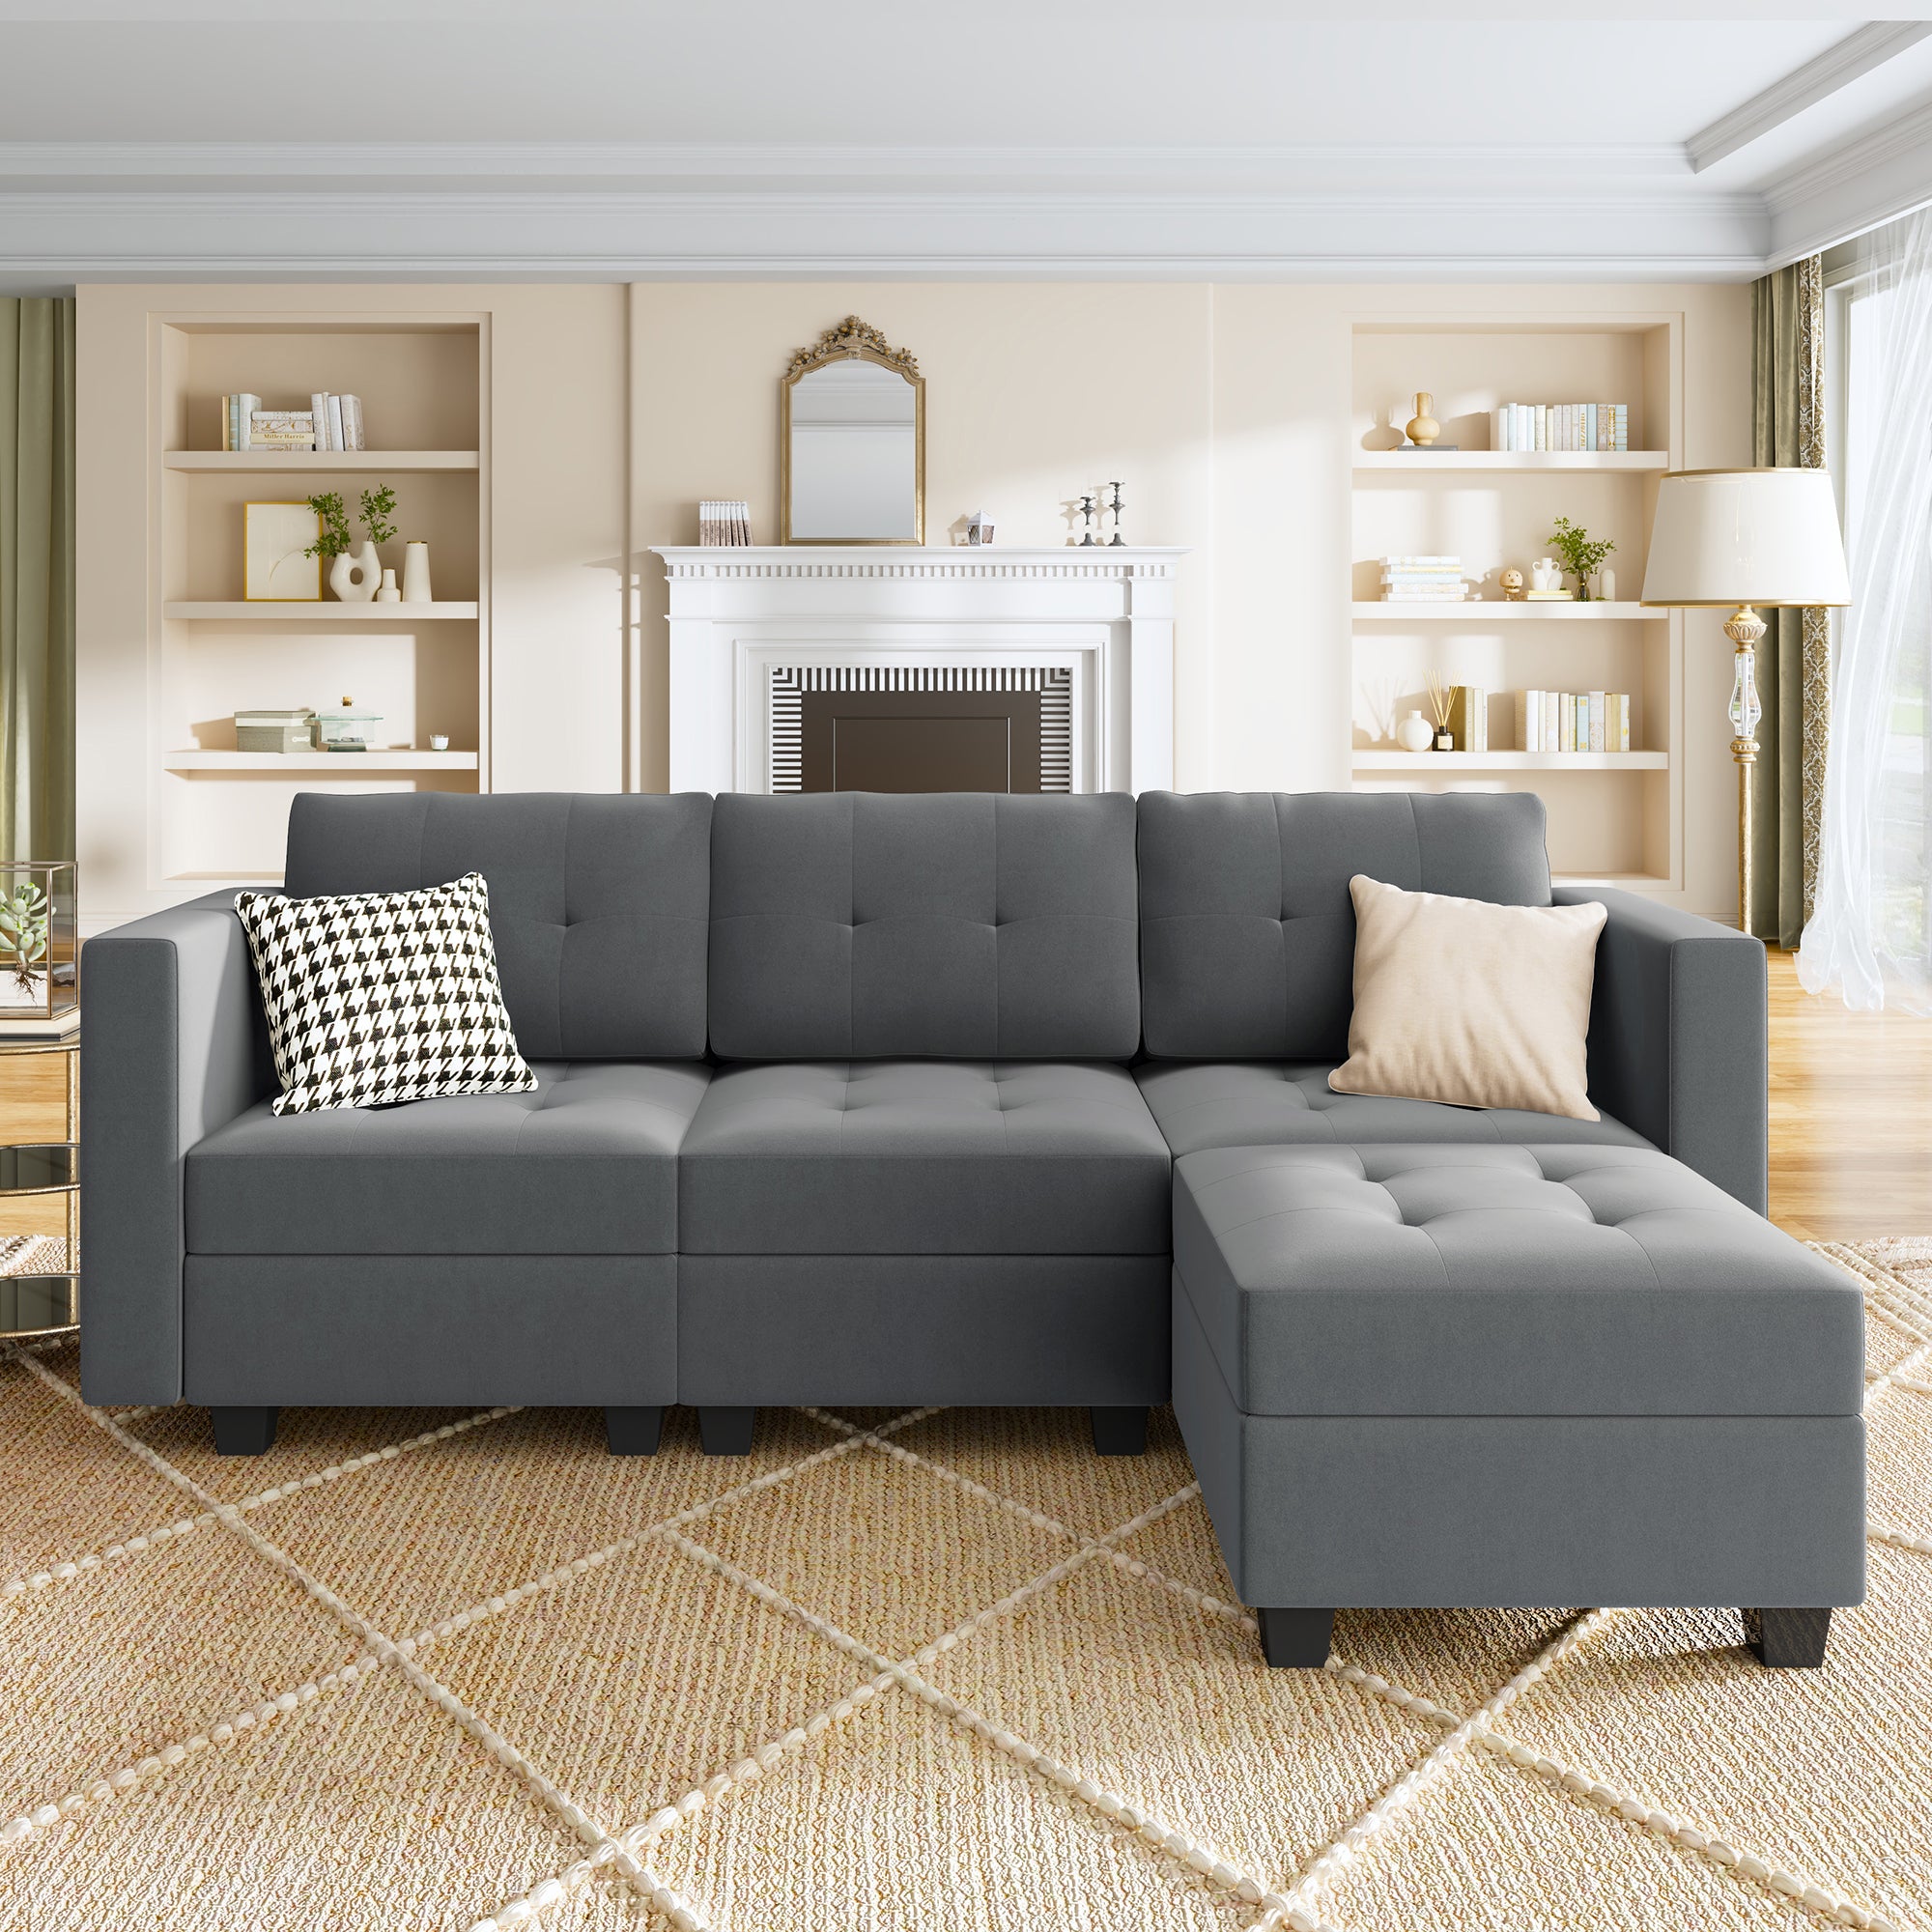 HONBAY Velvet Tufted 3-Seat L-Shaped Modular Sofa with Storage & Reversible Chaise